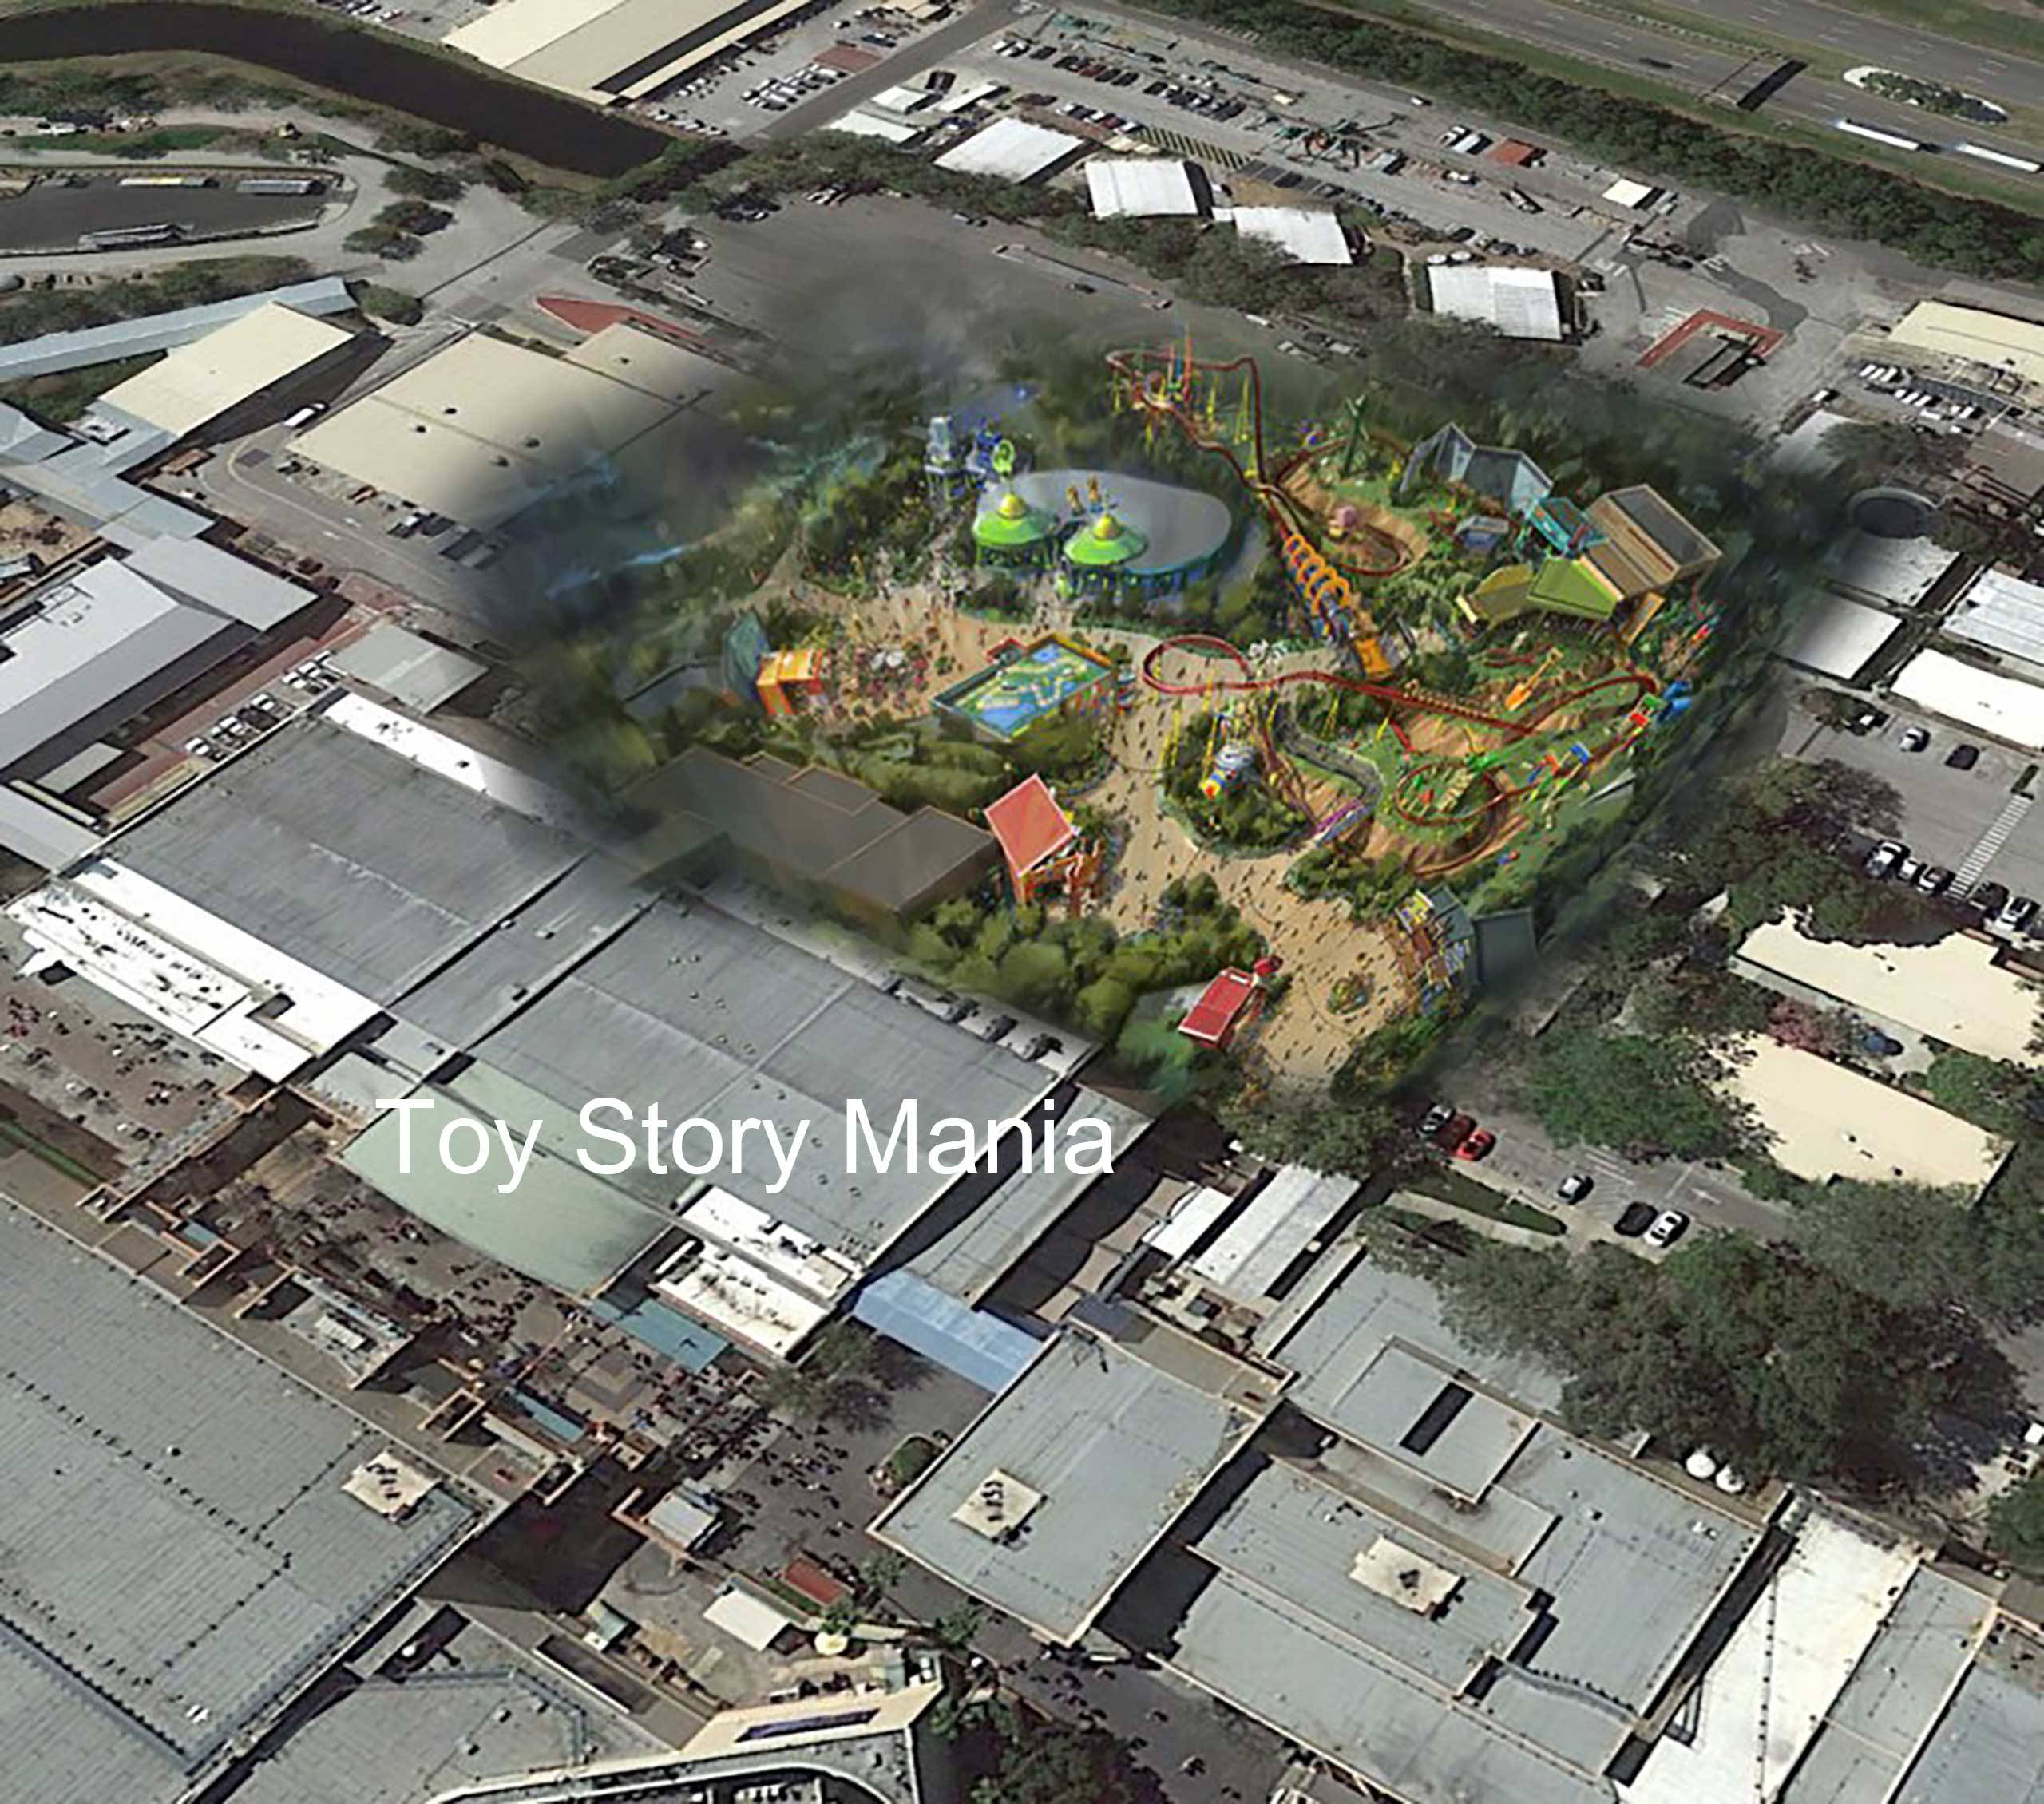 Possible location of Toy Story Land at Disney's Hollywood Studios. By Martin Smith